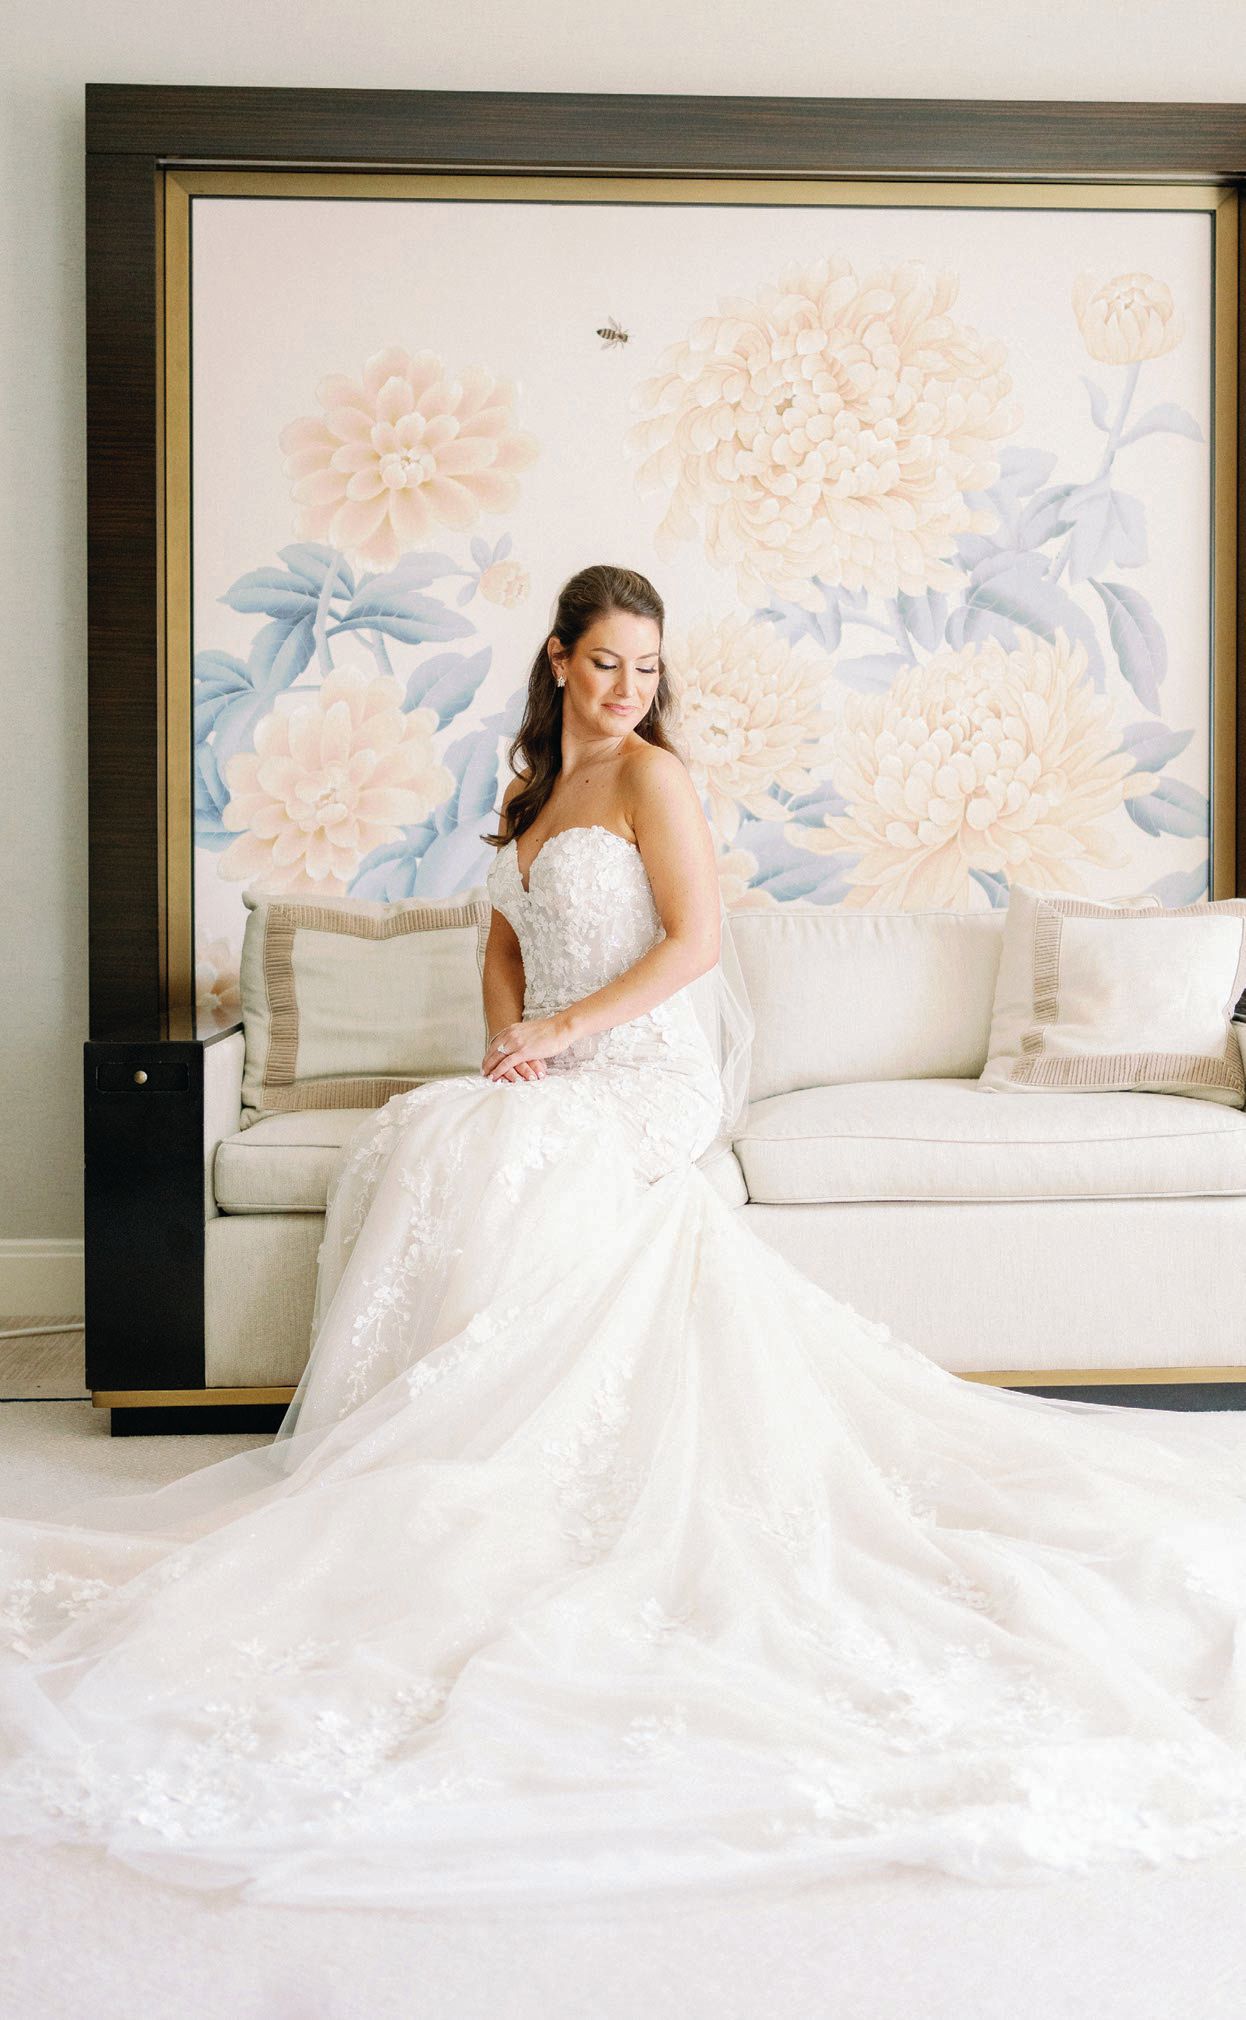 The bride looked chic in an Elizabeth Lee gown.